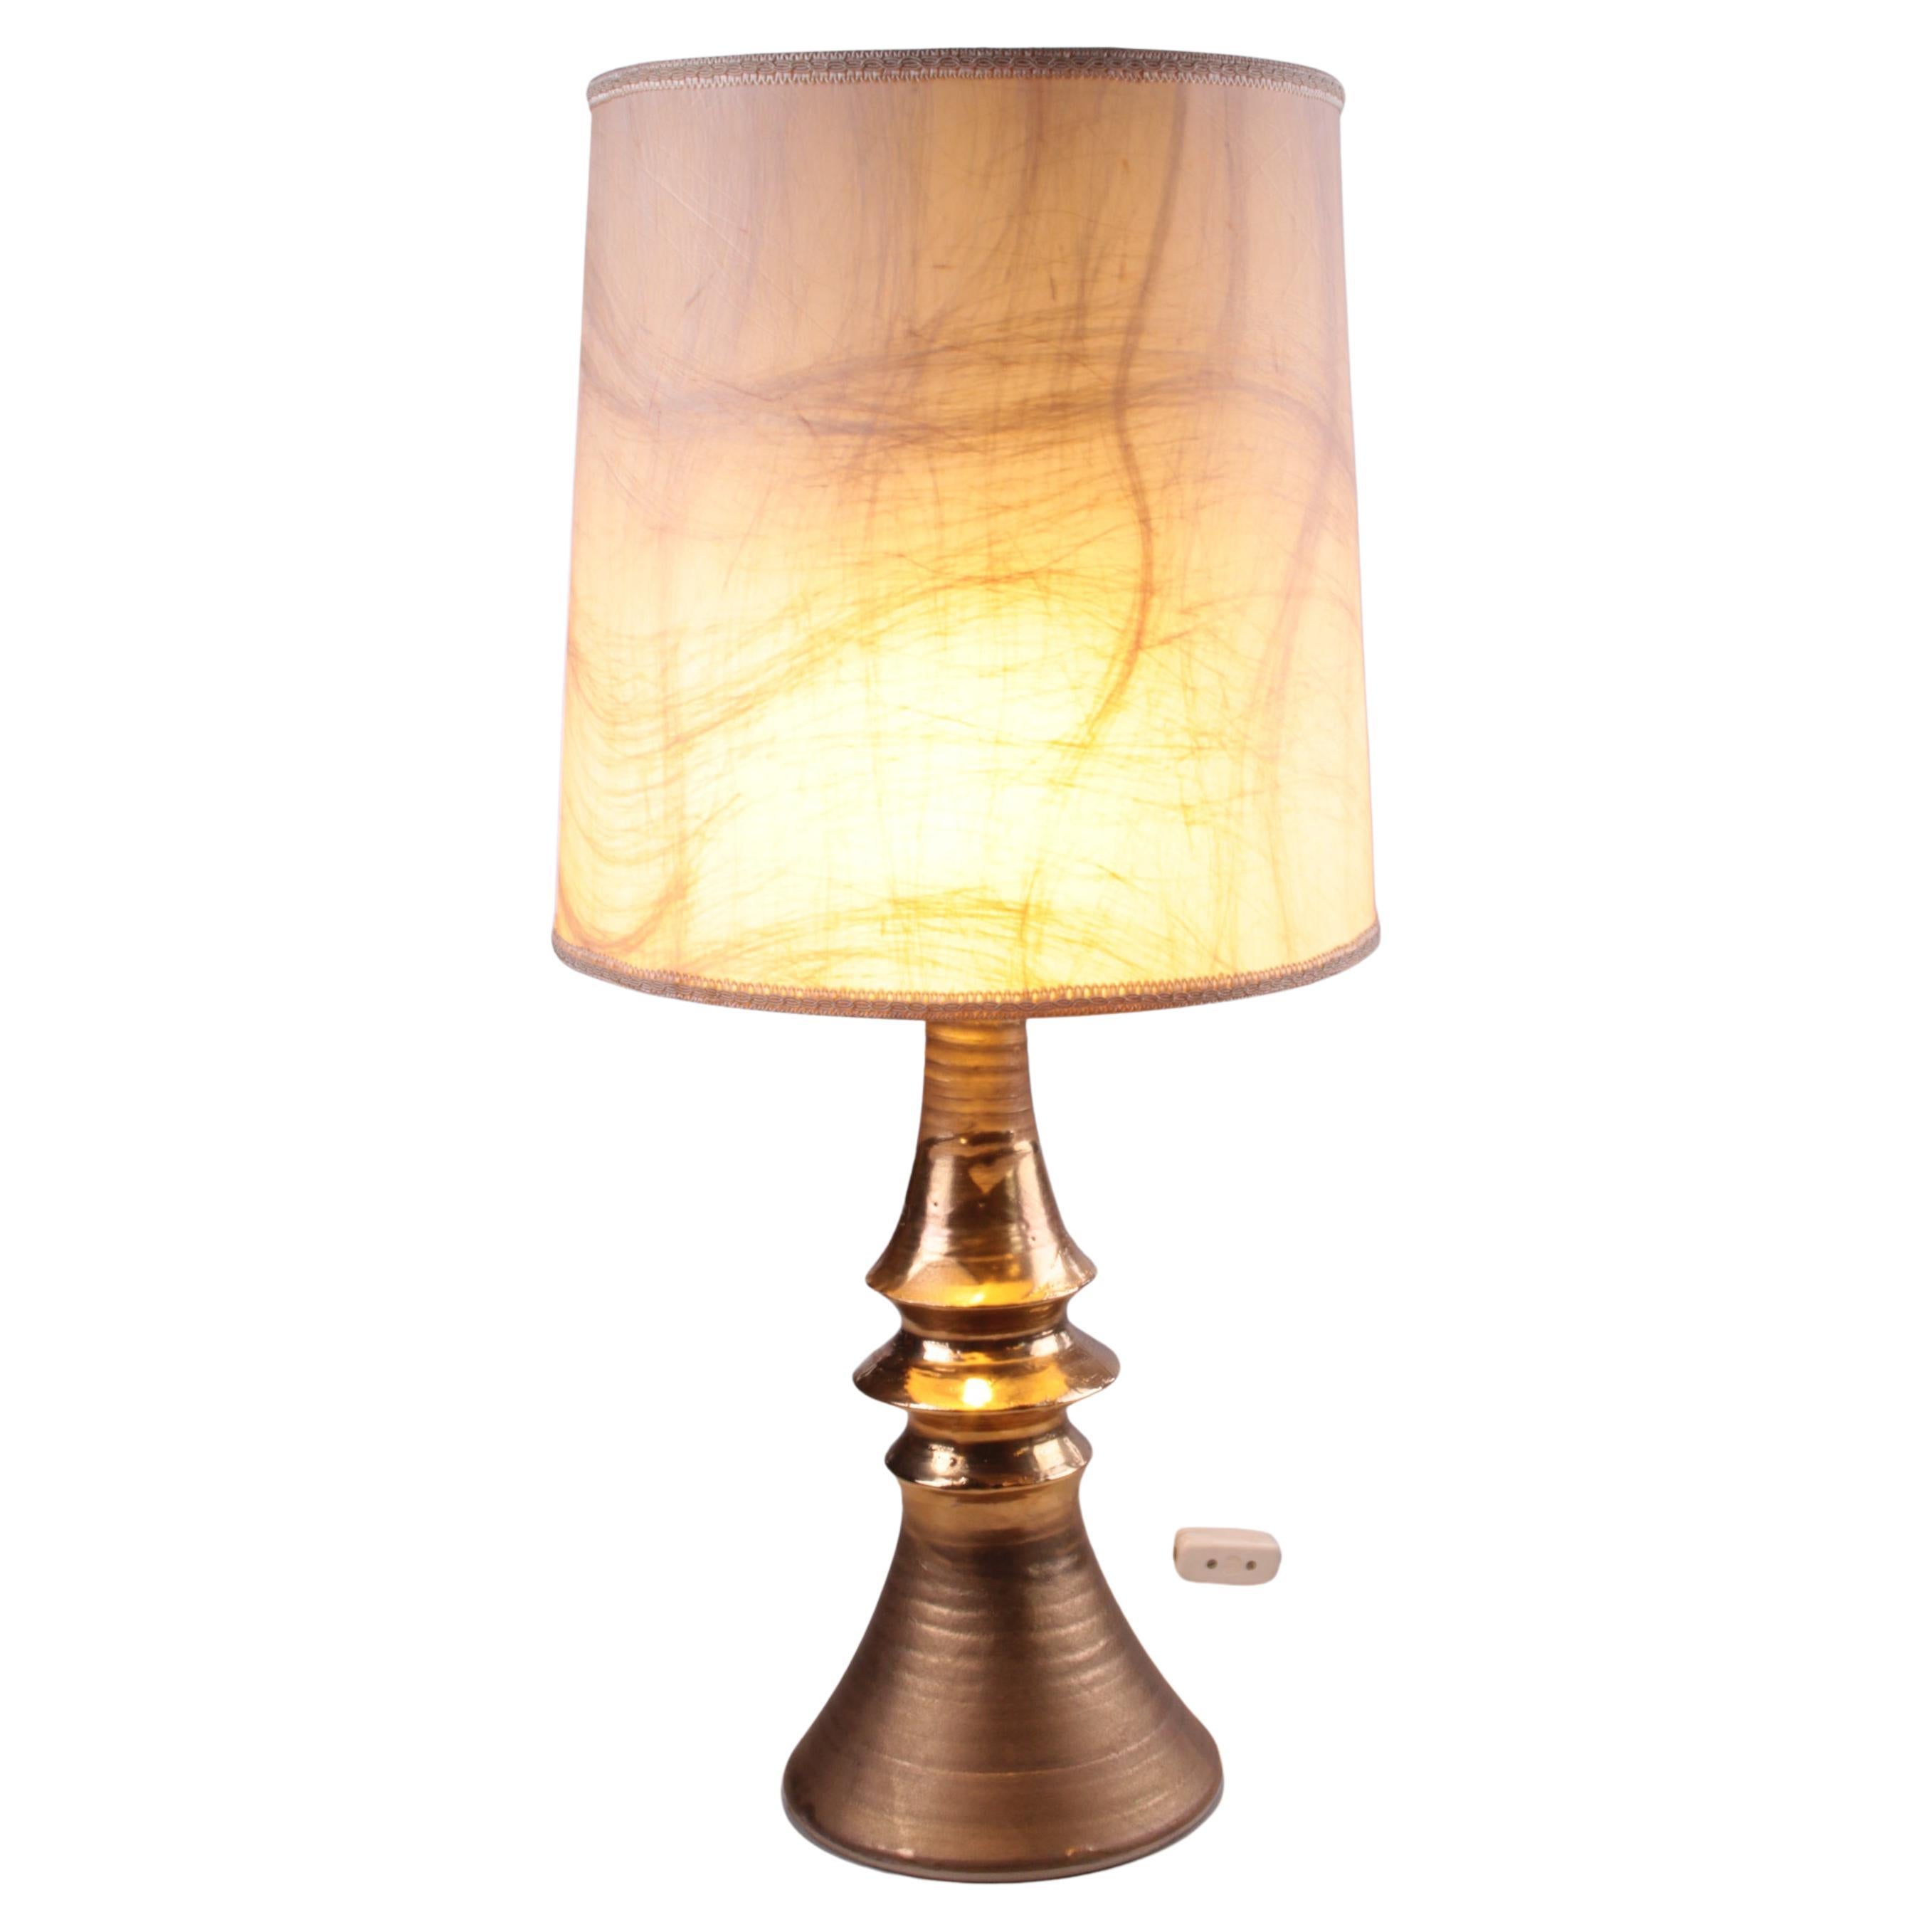 Large ceramic gold table lamp hand turned with original shade from the 1970s